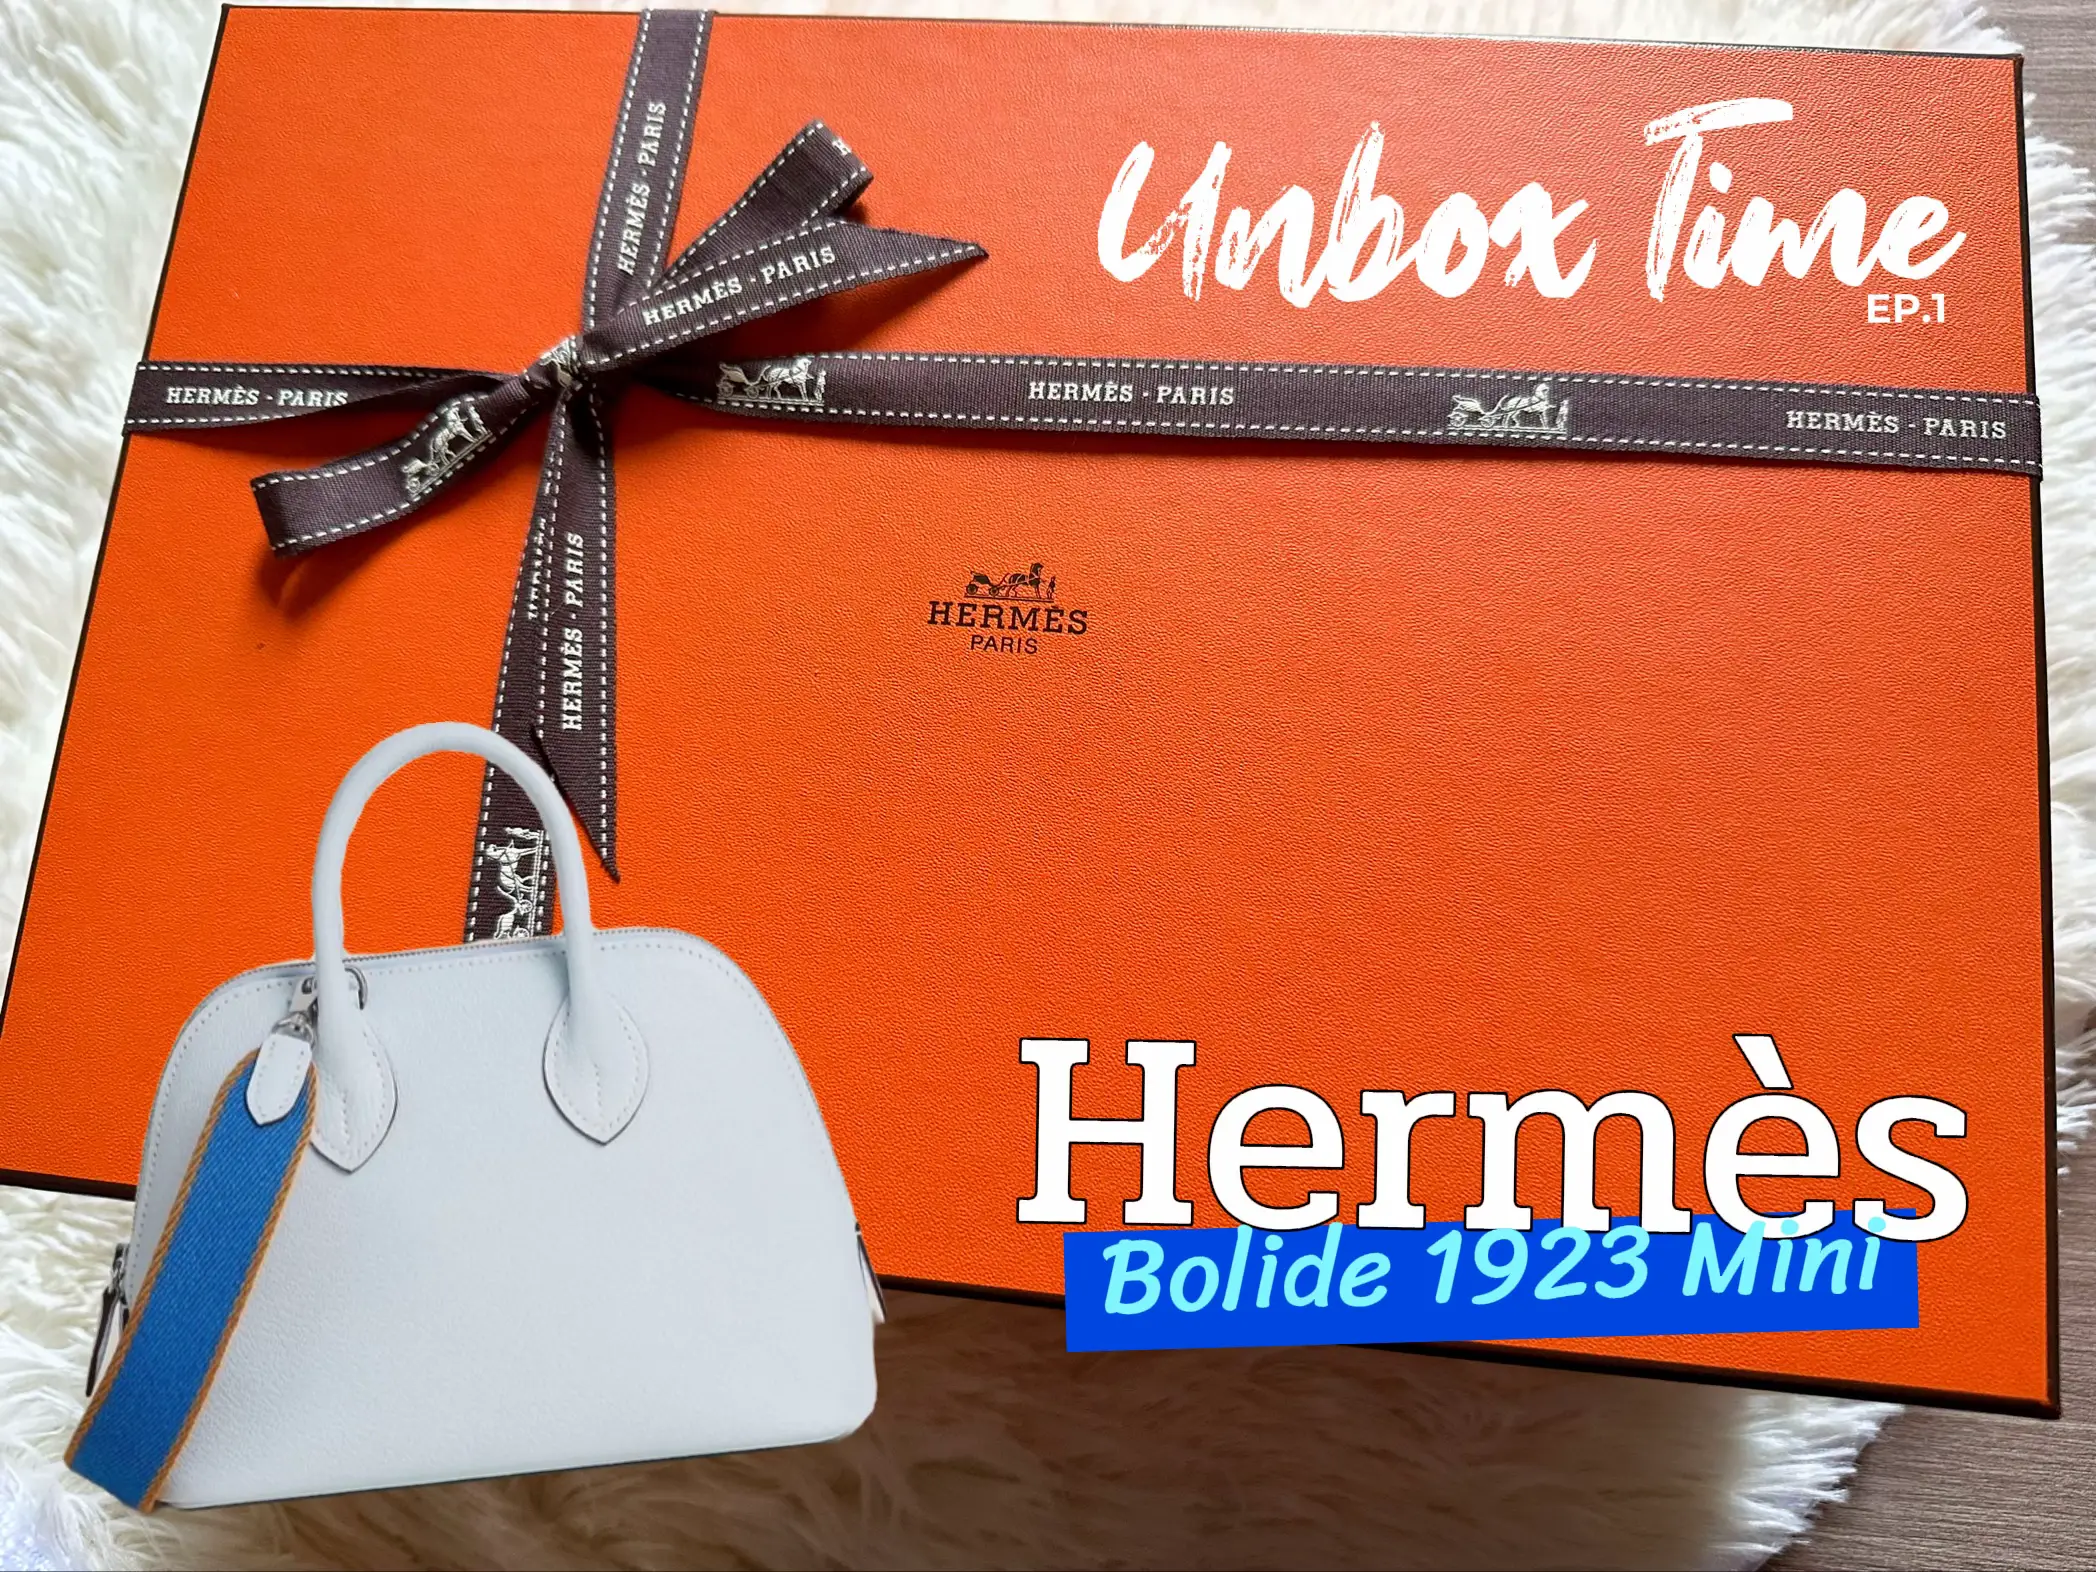 HERMES UNBOXING & REVIEW: Bolide 27 (Unboxing, History, Shopping